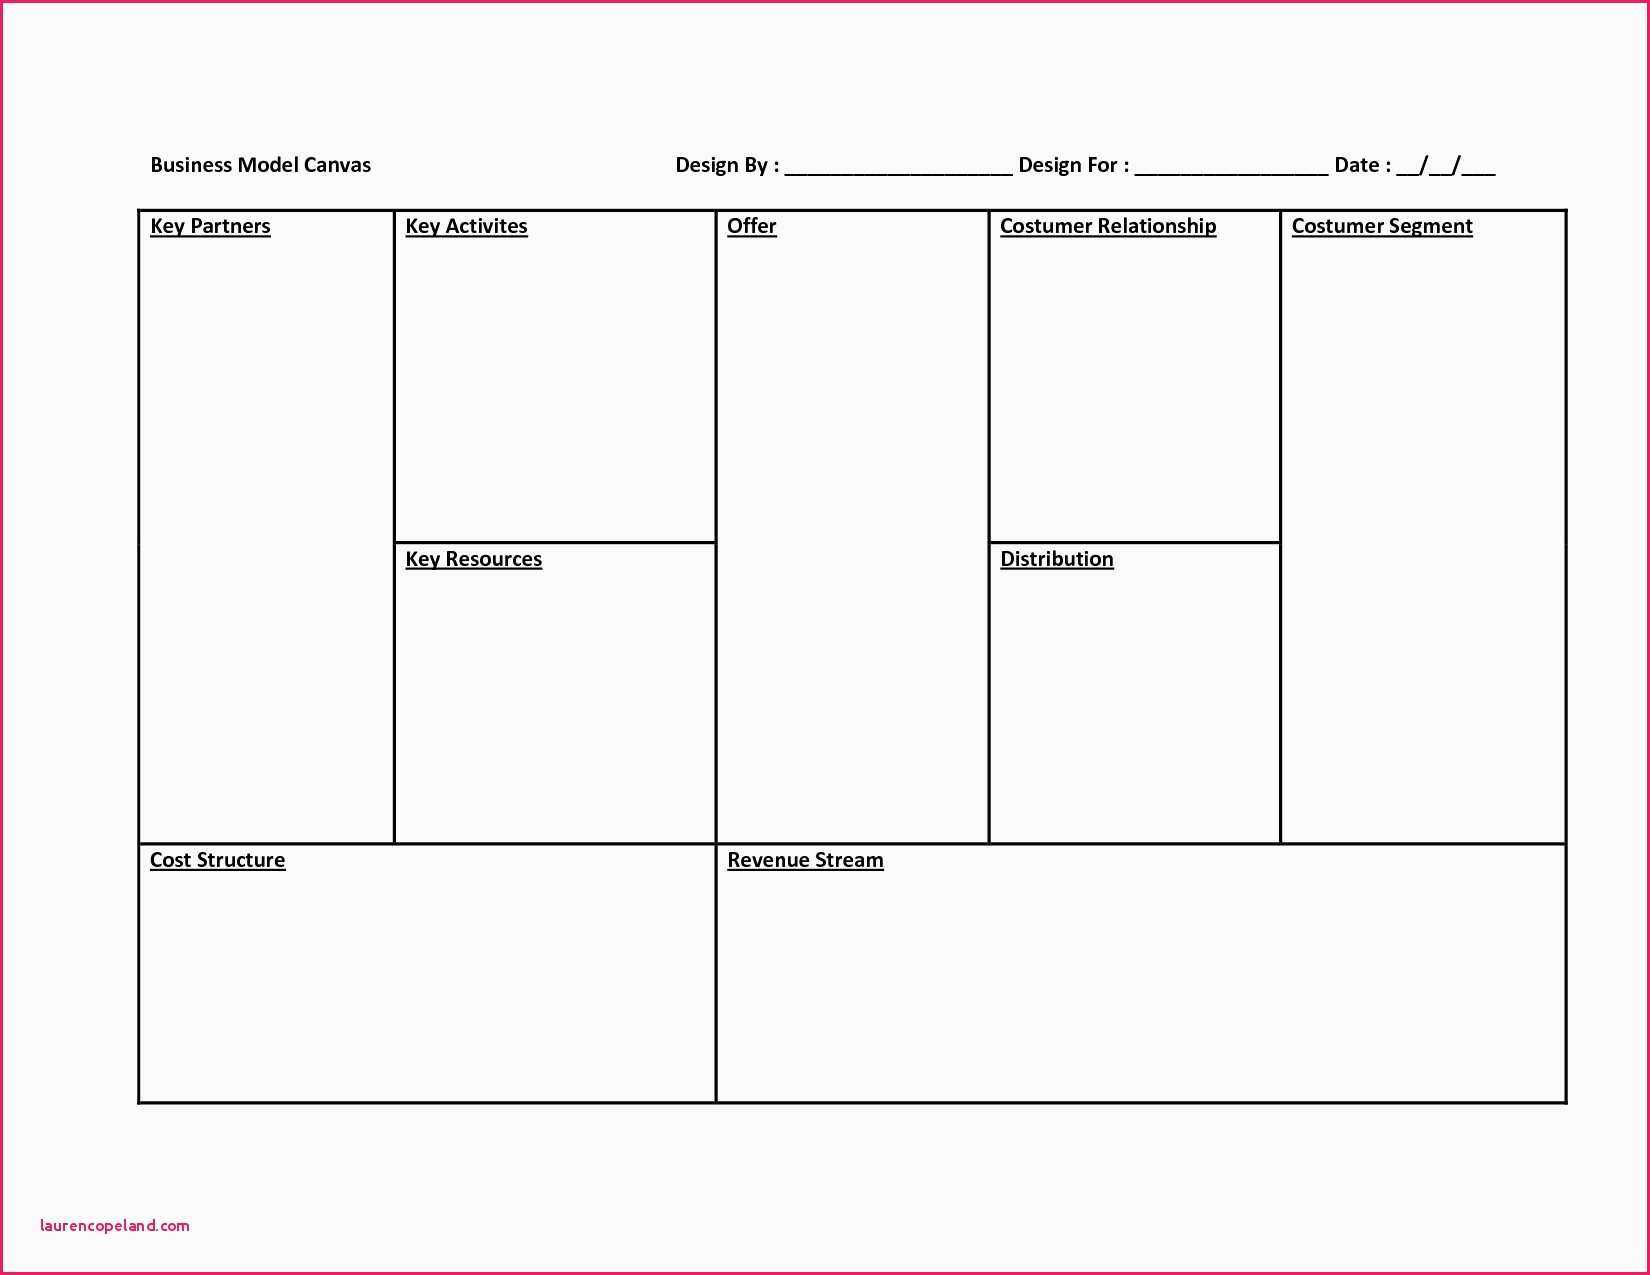 Business Model Canvas Template Word – Atlantaauctionco Within Business Canvas Word Template